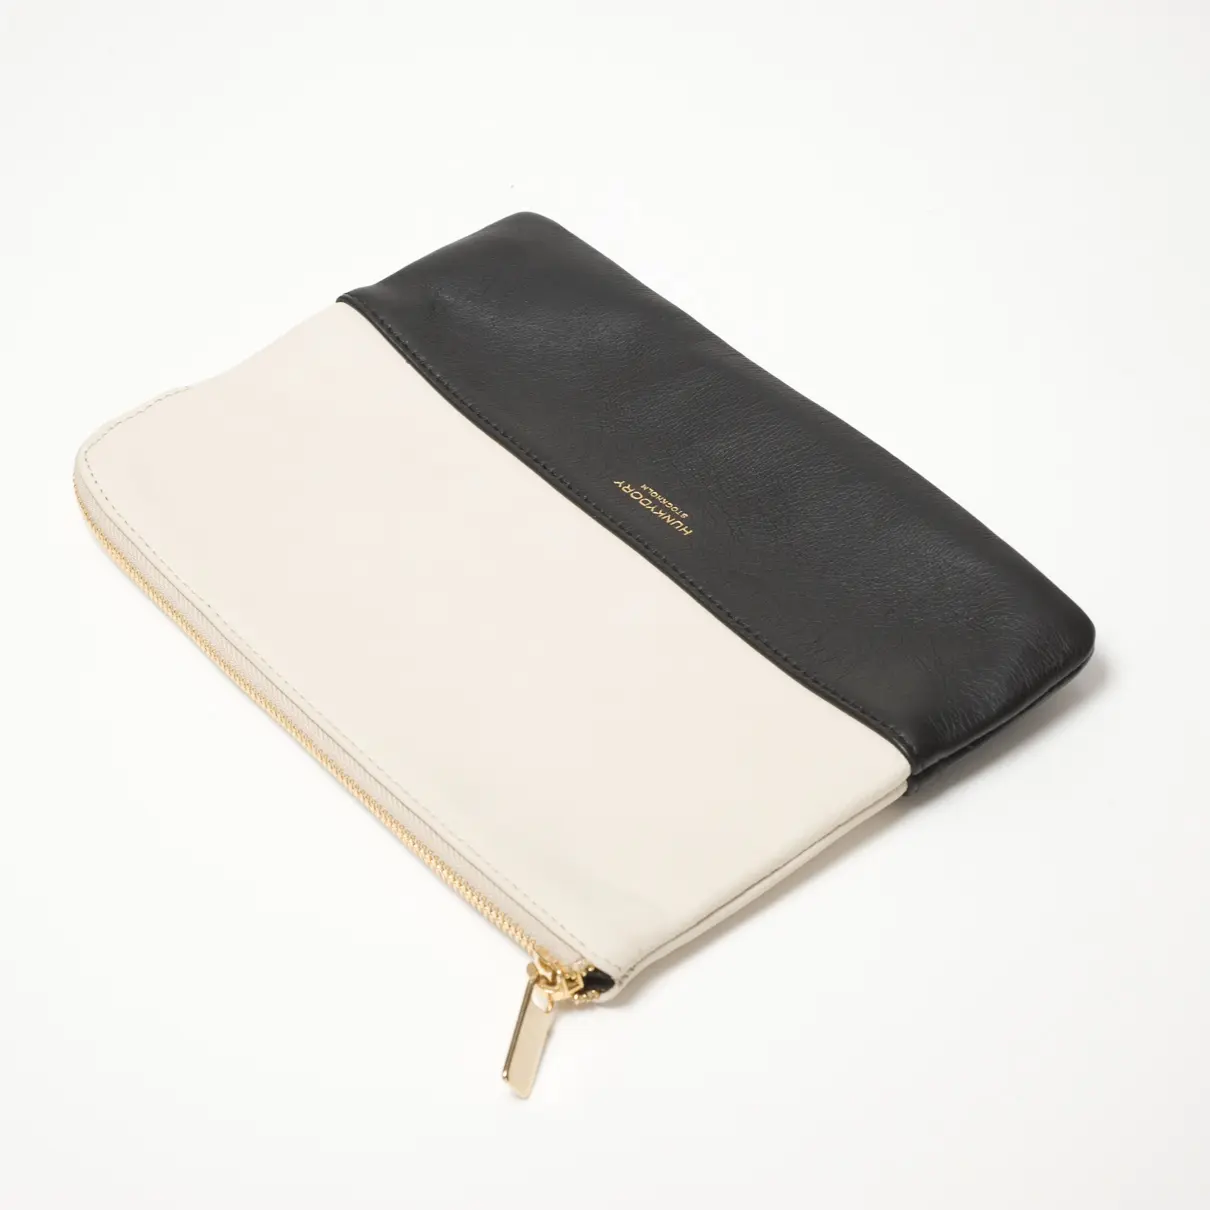 Buy Hunky Dory White Leather Clutch bag online